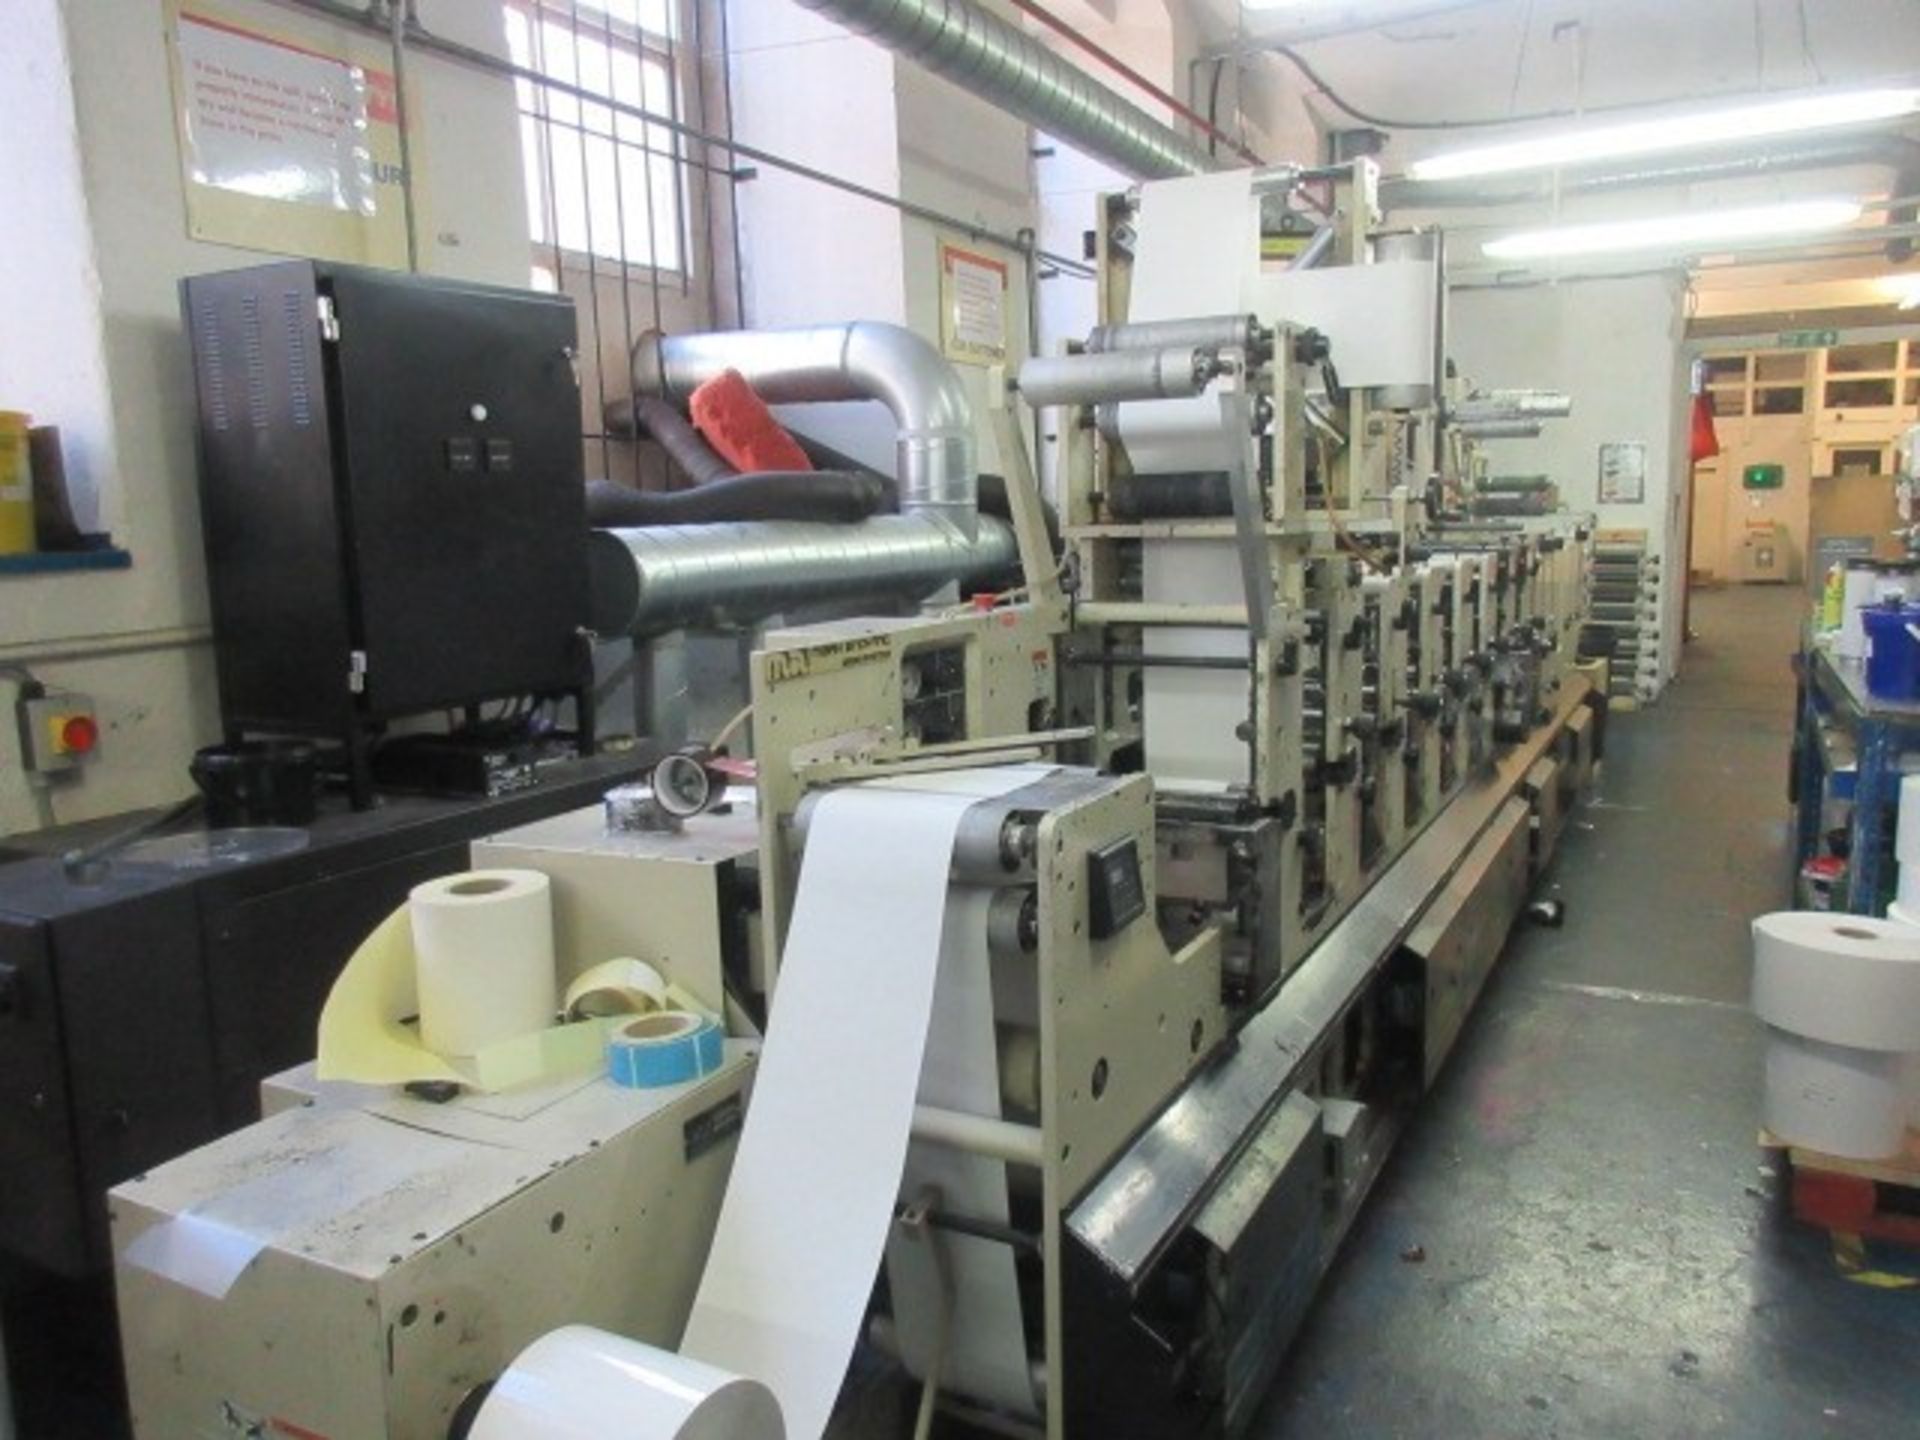 Mark Andy 2200-10F 10” 8 colour flexographic label printing press. Serial no: 1260086 (2002) - Image 56 of 383